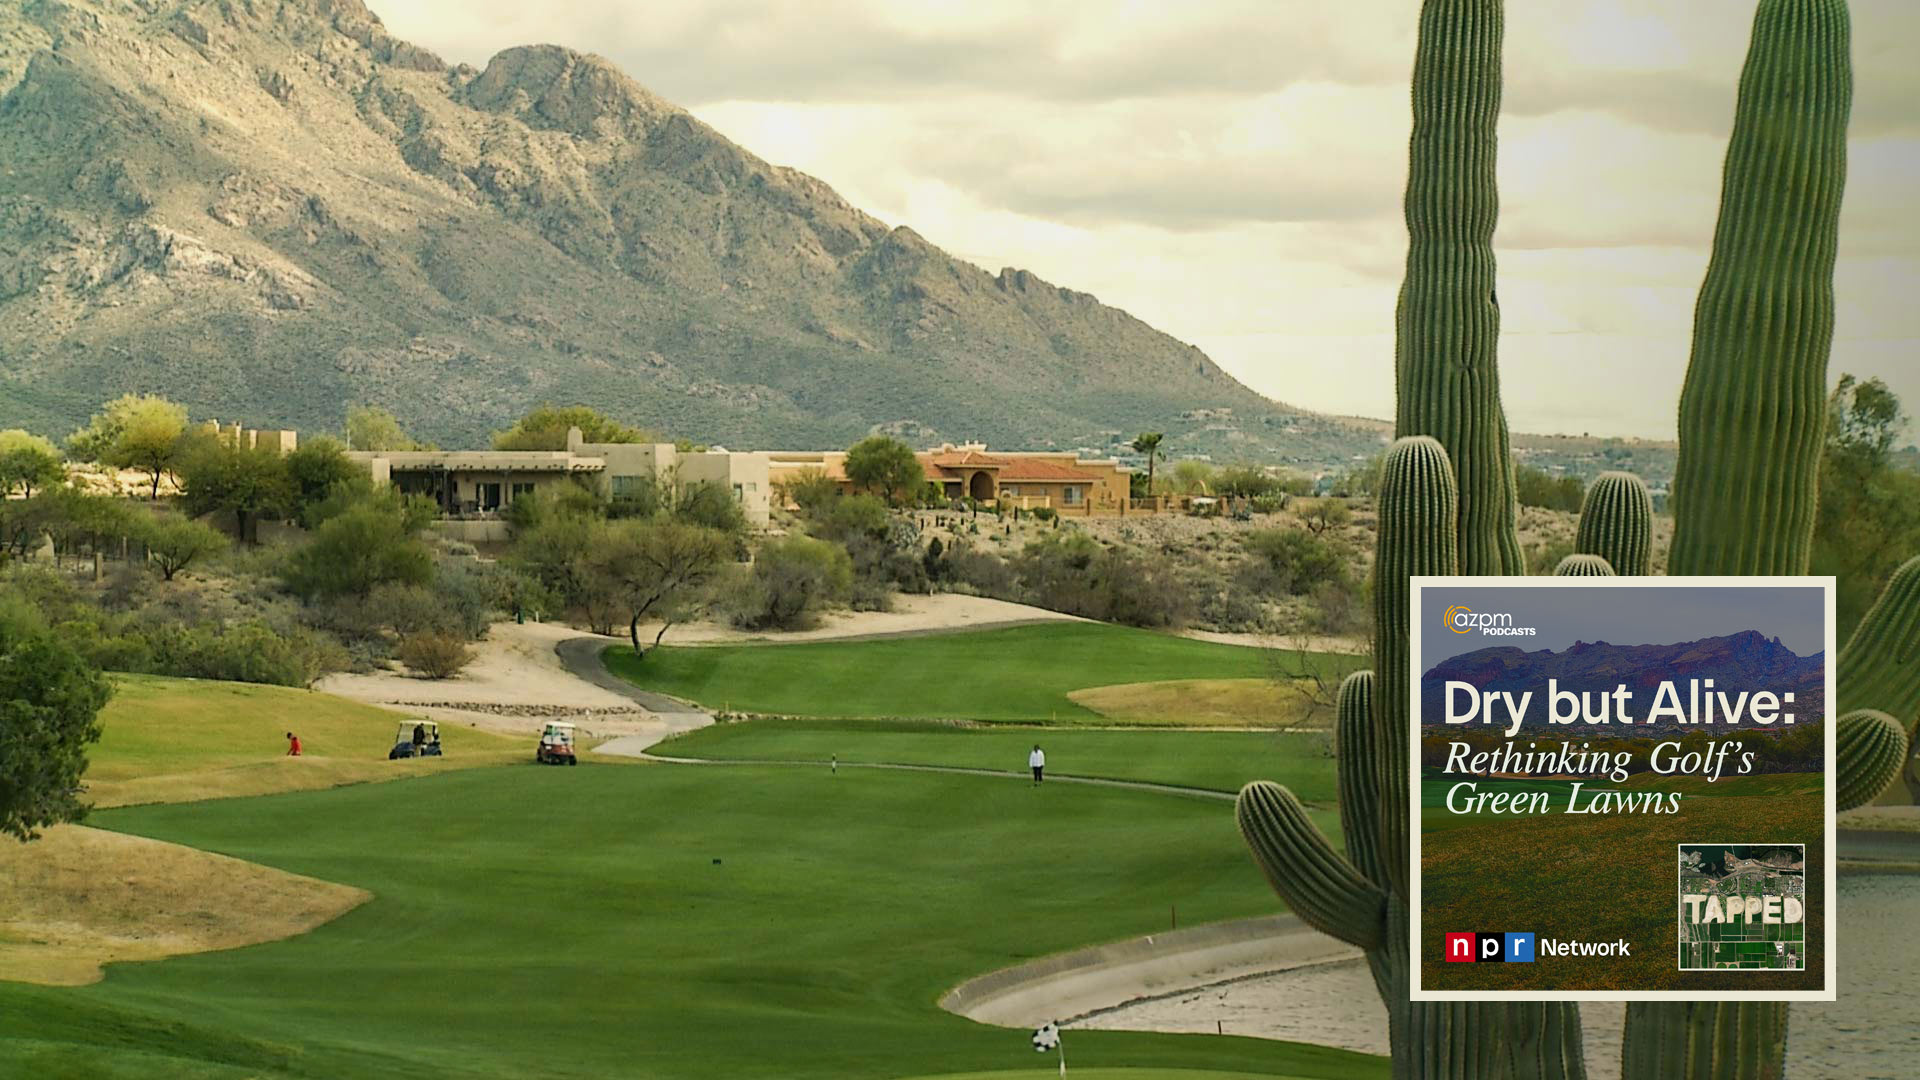 Arizona has long been a hotspot for golfers looking to keep up their game as weather elsewhere turns cold. But, for just as long, the state has been working to limit water use by golf courses. How much of a part does golf play in Arizona's water issues?